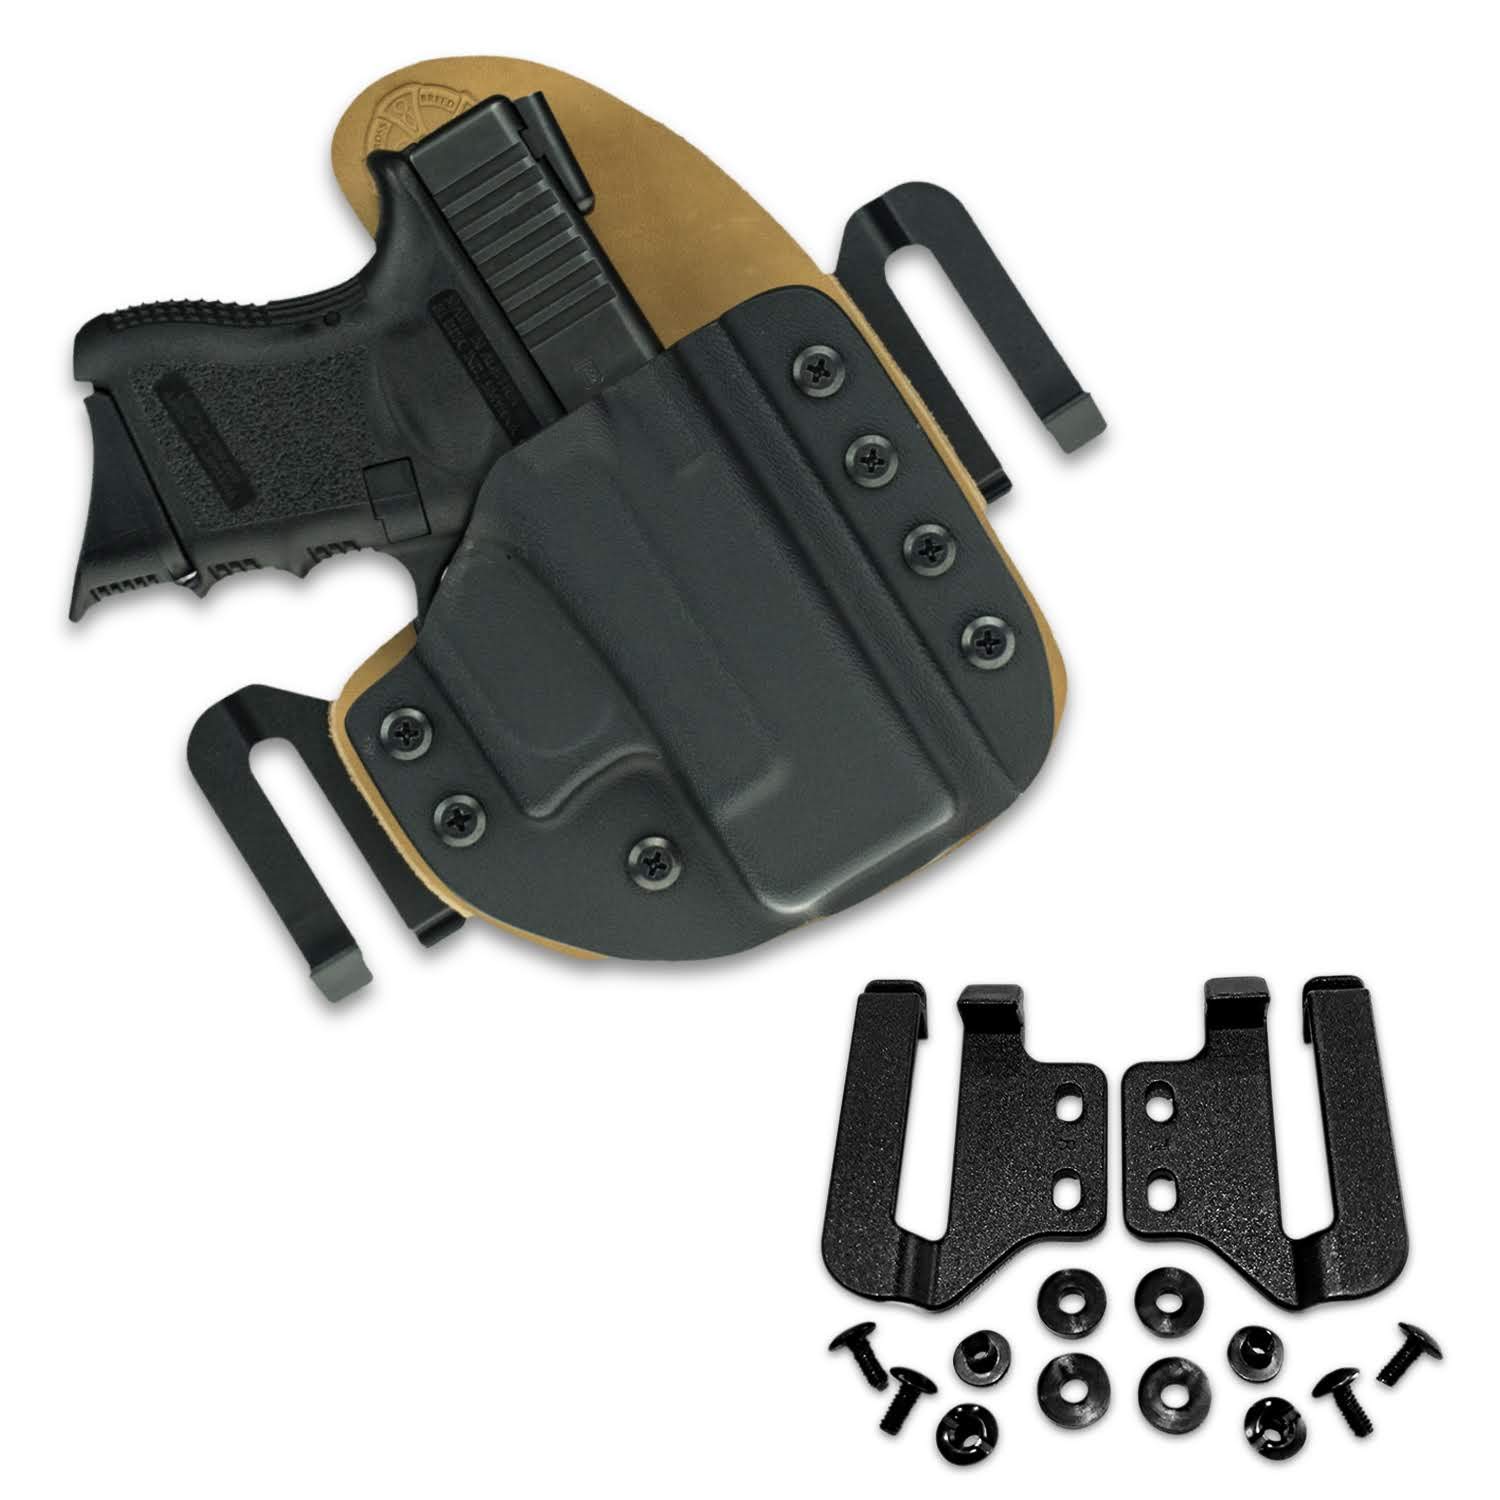 HolsterBuilder Holster Speed Clips - Kydex Belt Clip for Outlaw OWB  Holsters - Adjustable Cantt for Kydex, Leather, and Hybrid Holster - Quick Kydex  Clip High-Grade Material with Hardware 1.75